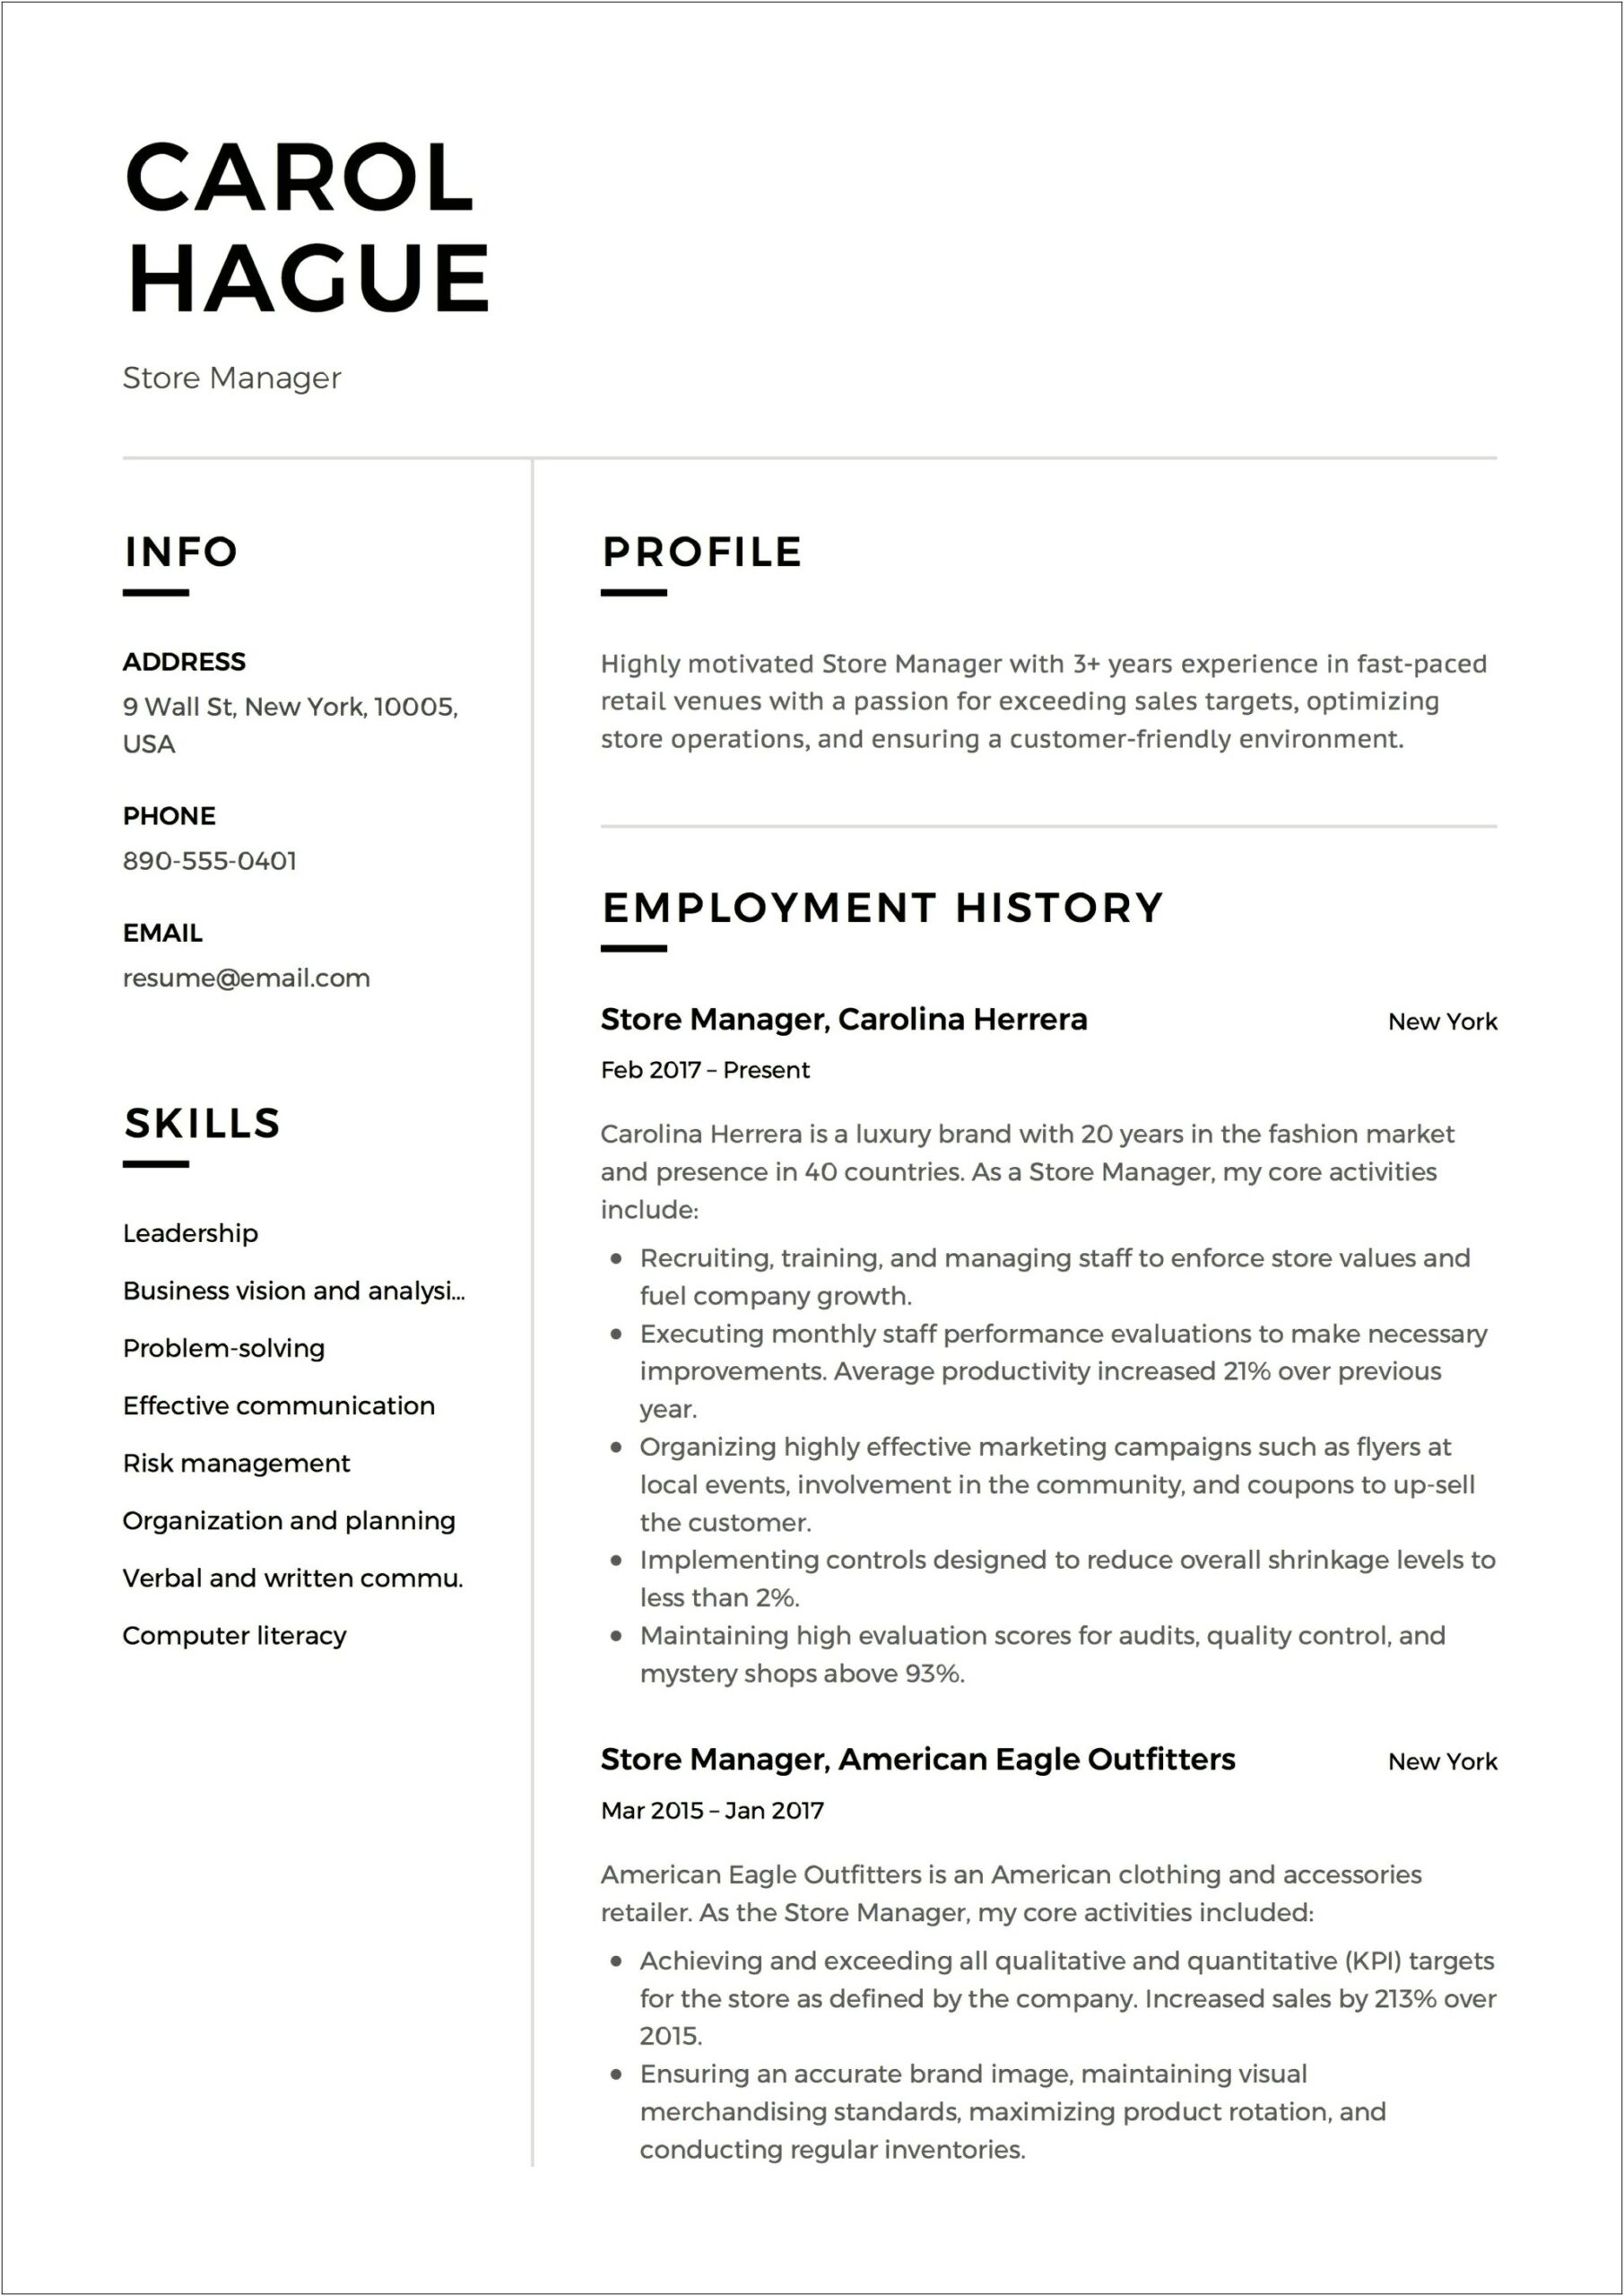 Resume To Work In A Clothing Store